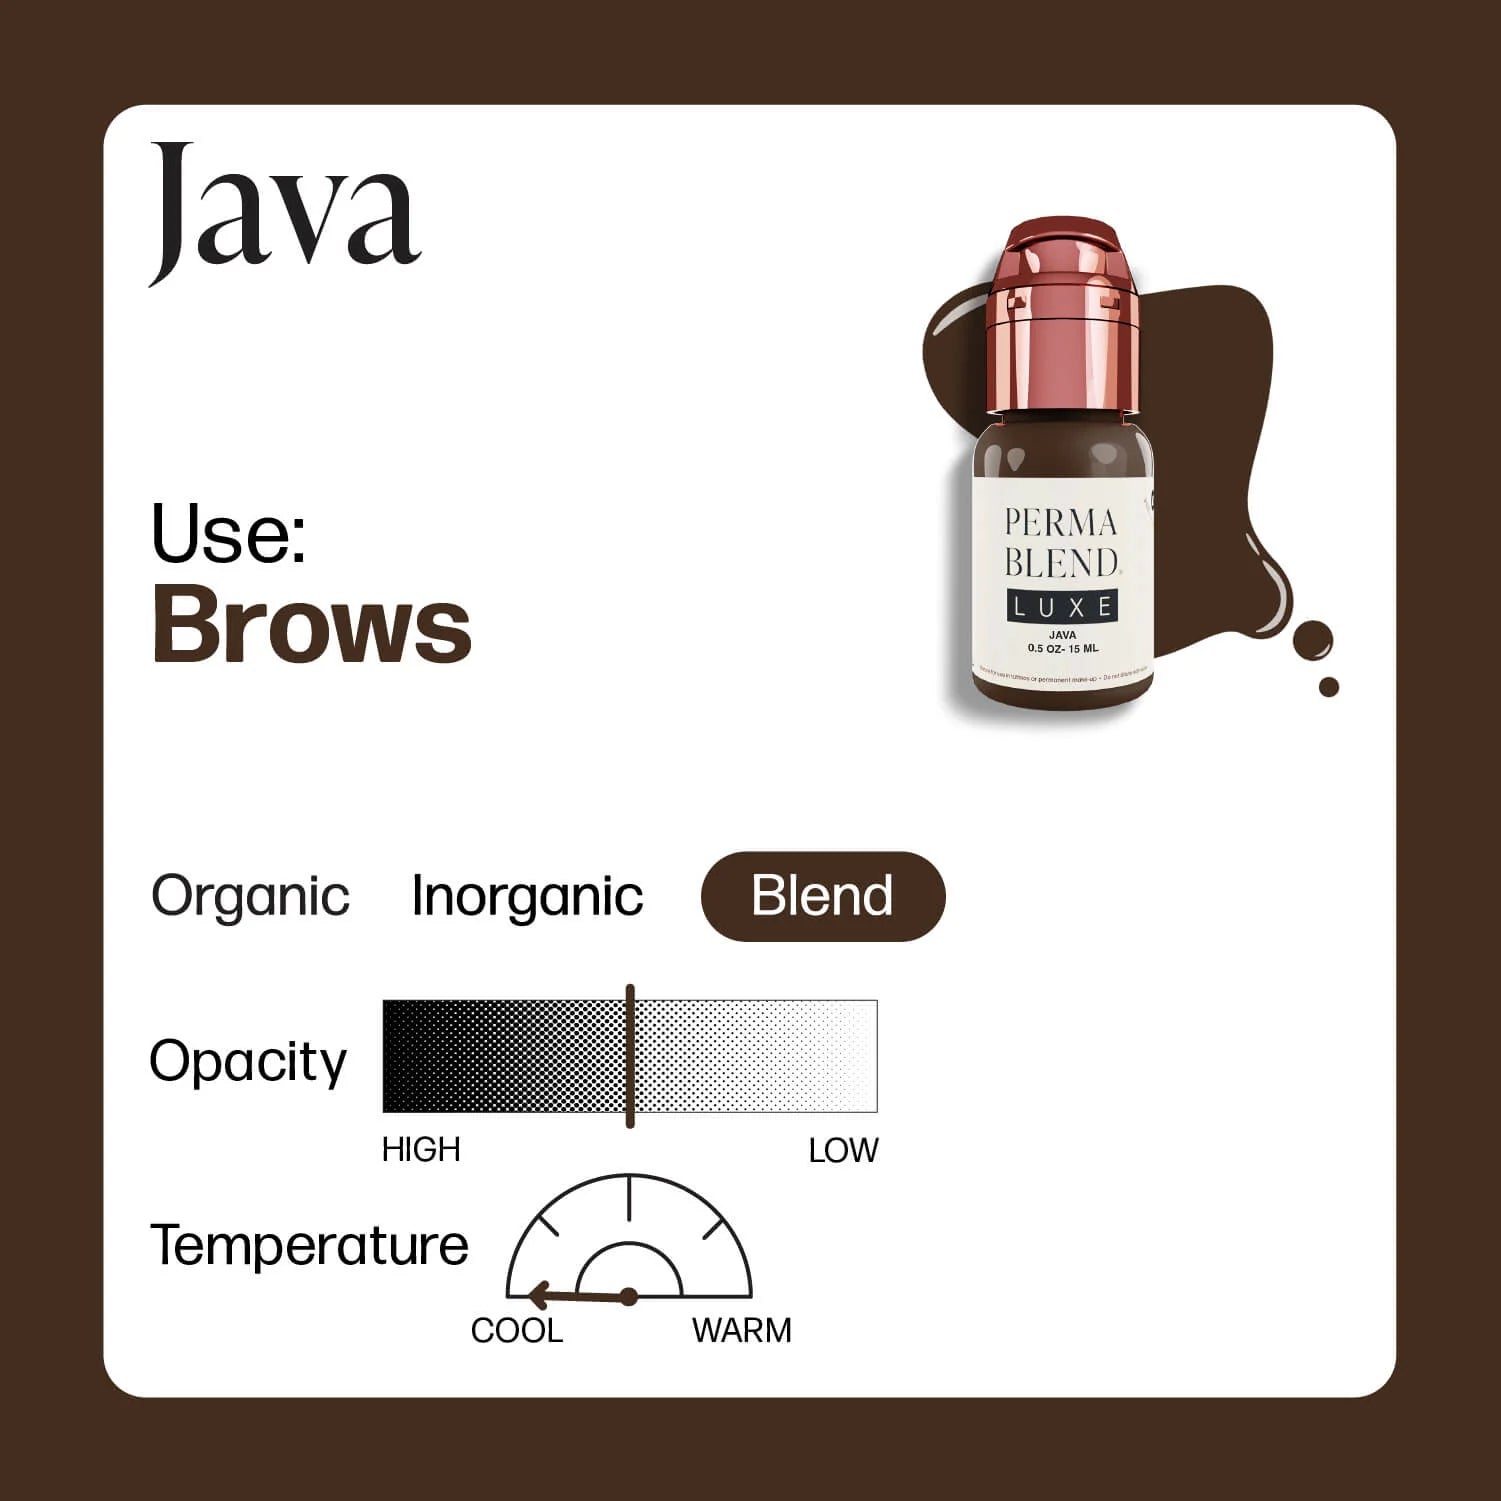 Perma Blend Luxe - Java